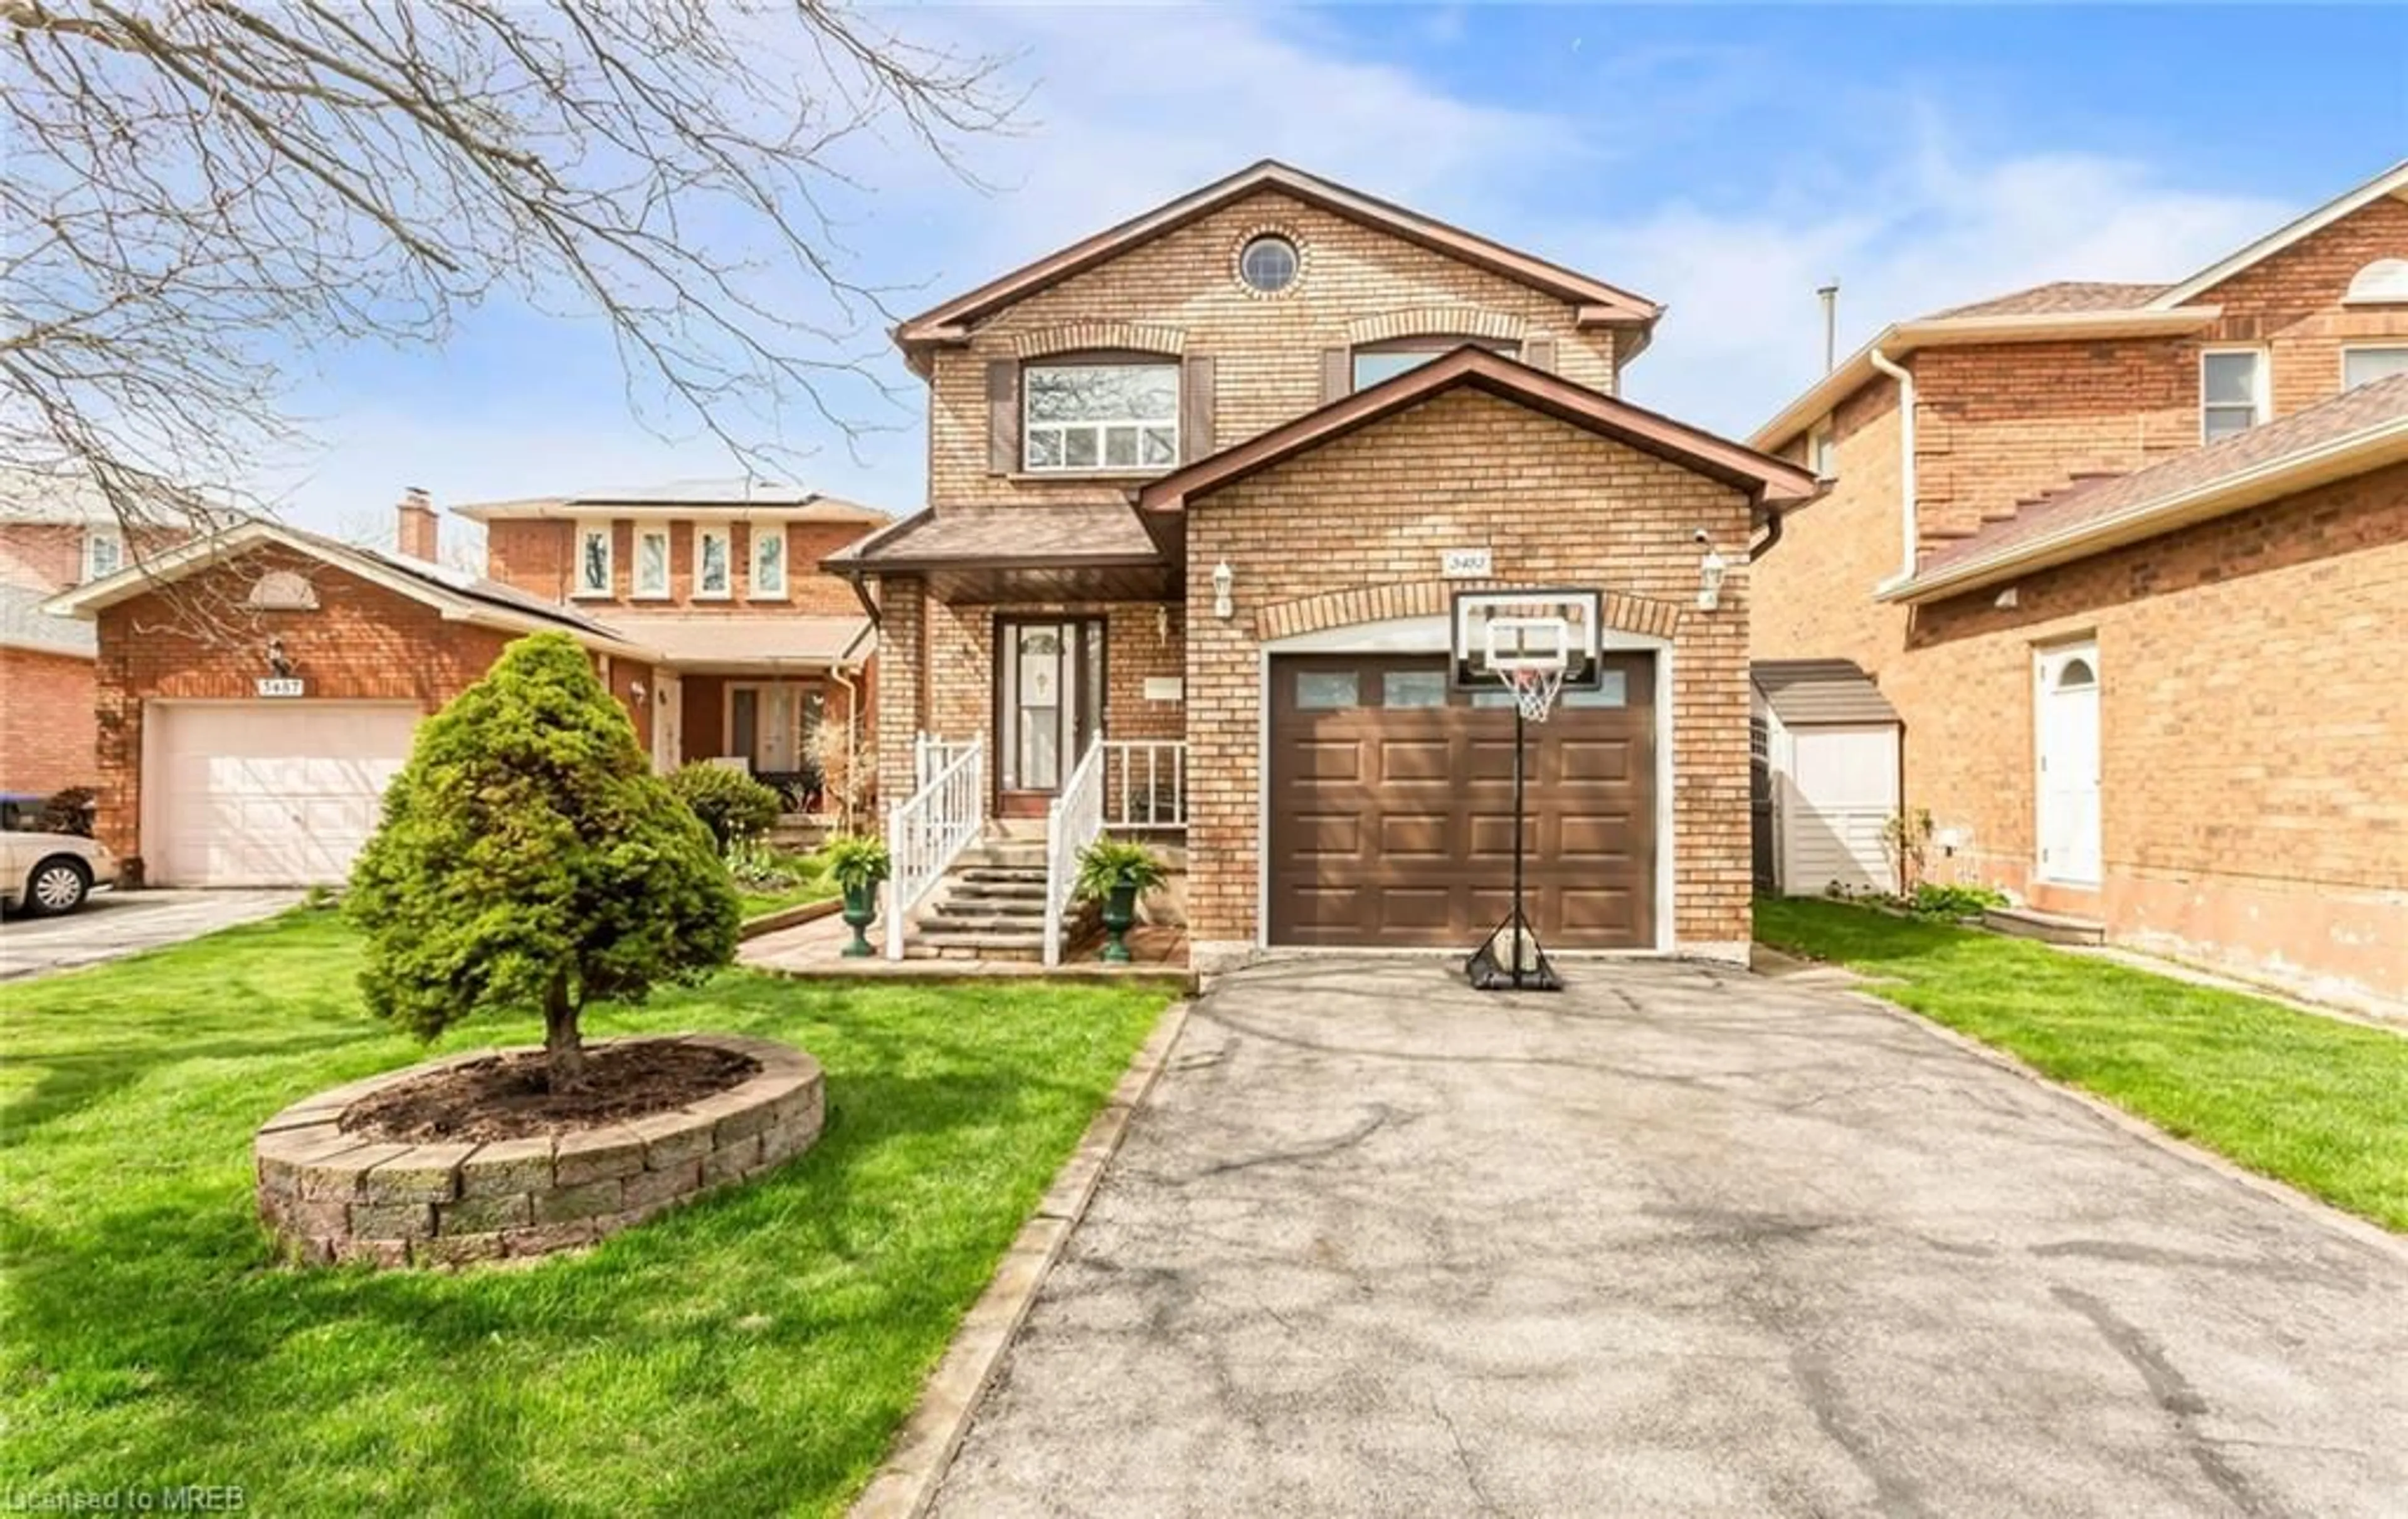 Home with brick exterior material for 3483 Chartrand Cres, Mississauga Ontario L5L 4E2